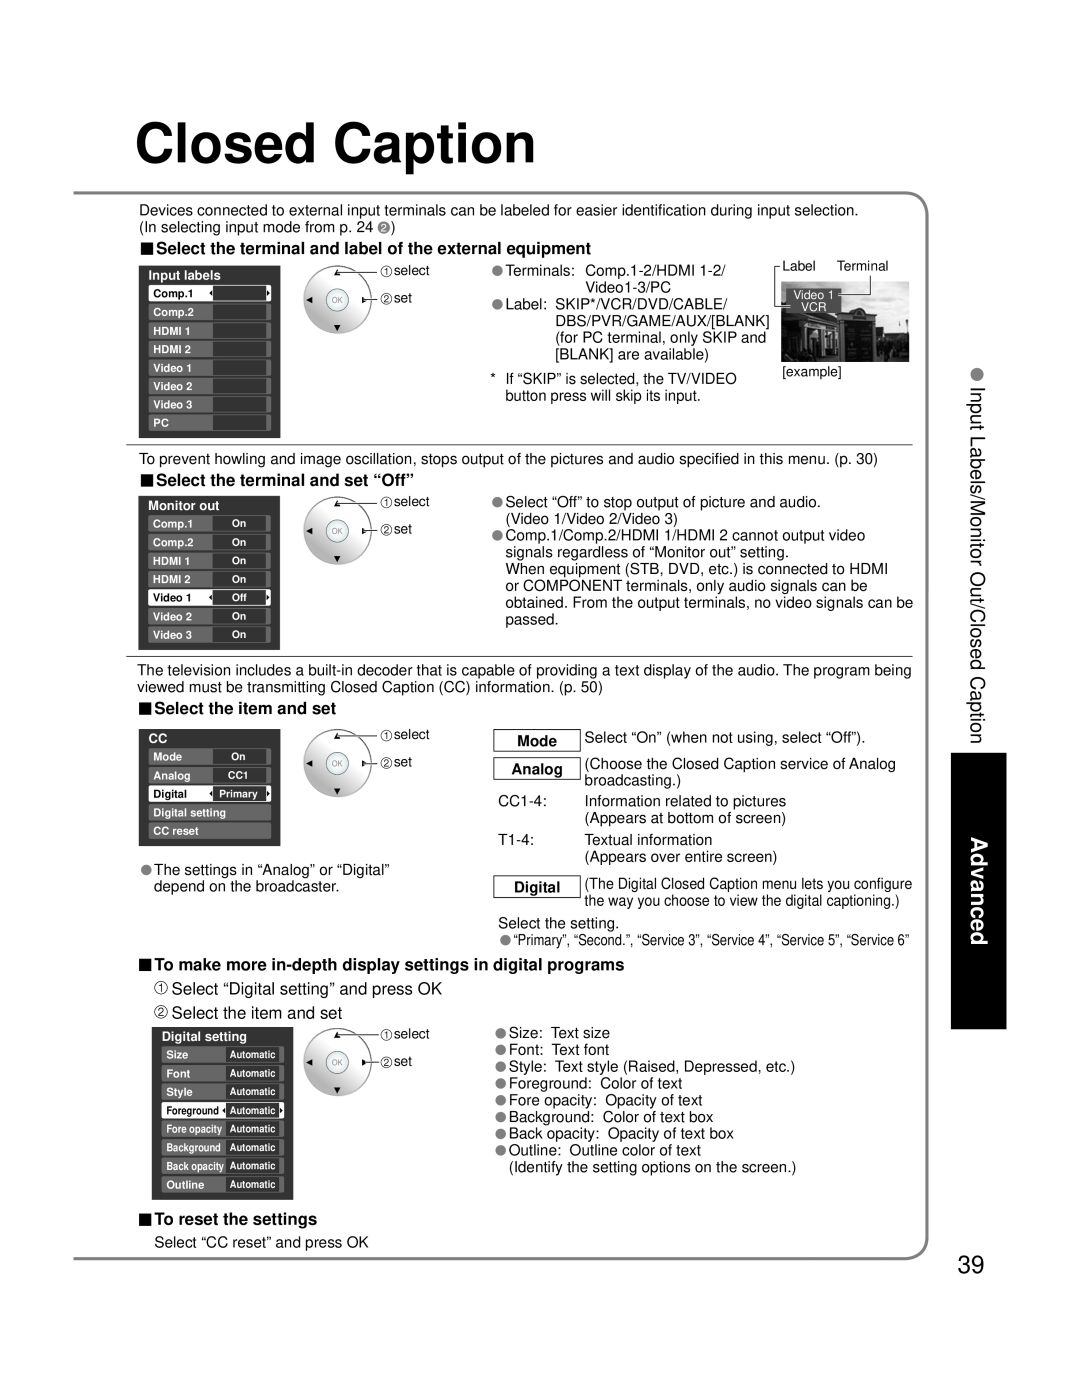 Panasonic TH 50PZ700U Input Labels/Monitor Out/Closed Caption, Select the terminal and label of the external equipment 